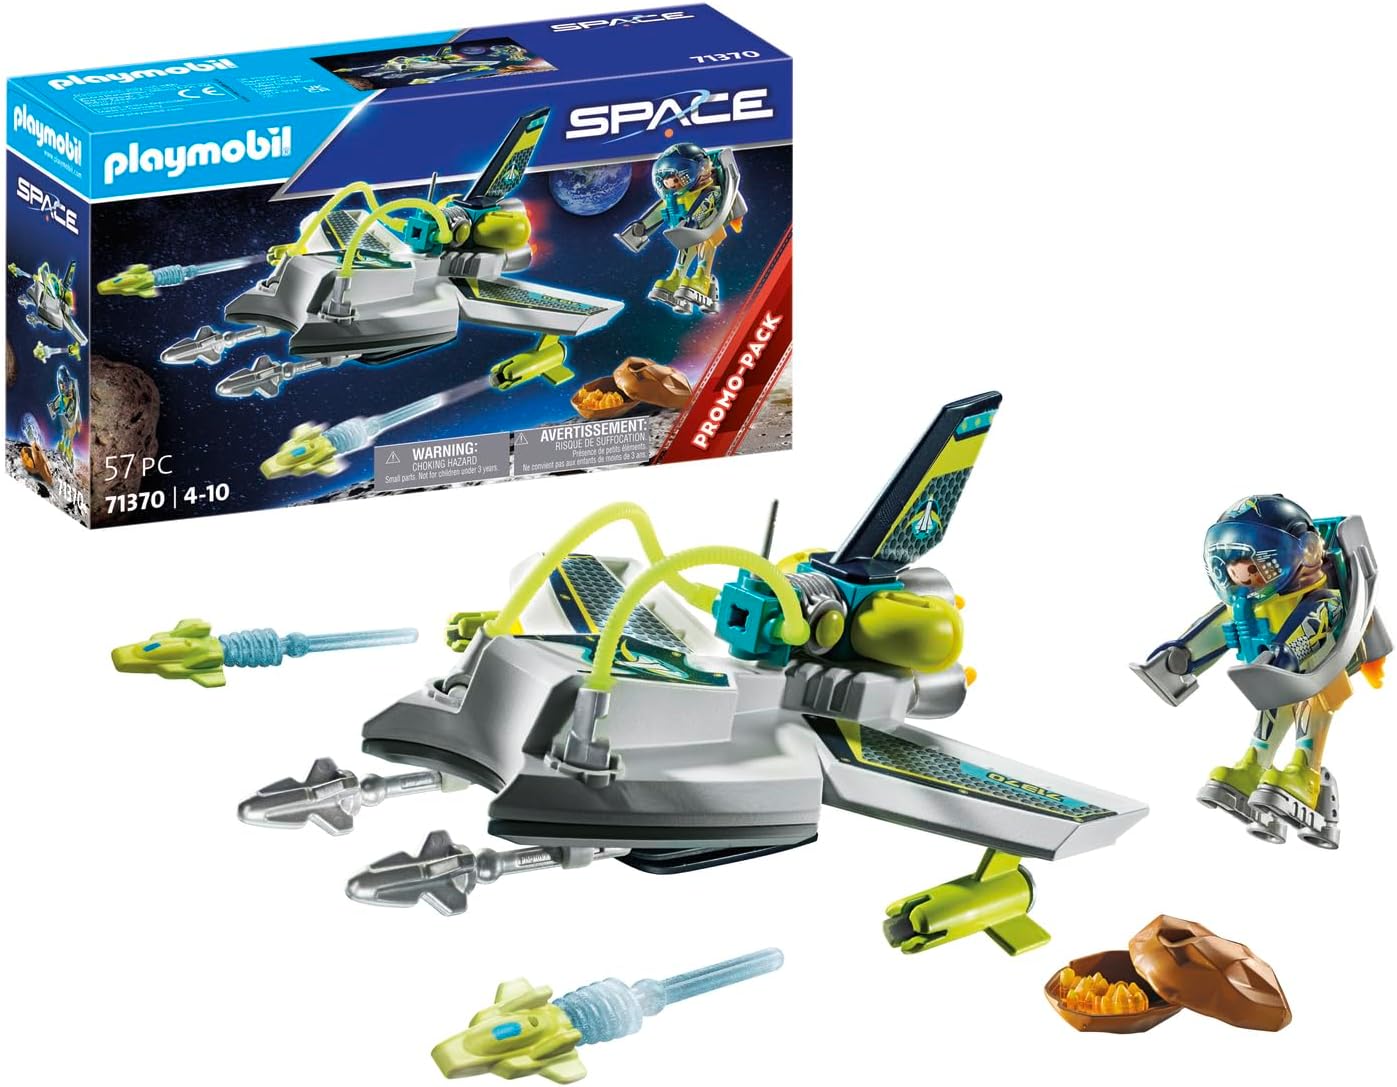 PLAYMOBIL Space Promo Pack 71370 High-Tech Space Drone, Space, Jetbag and Shootable Cannons, Toy for Children from 4 Years